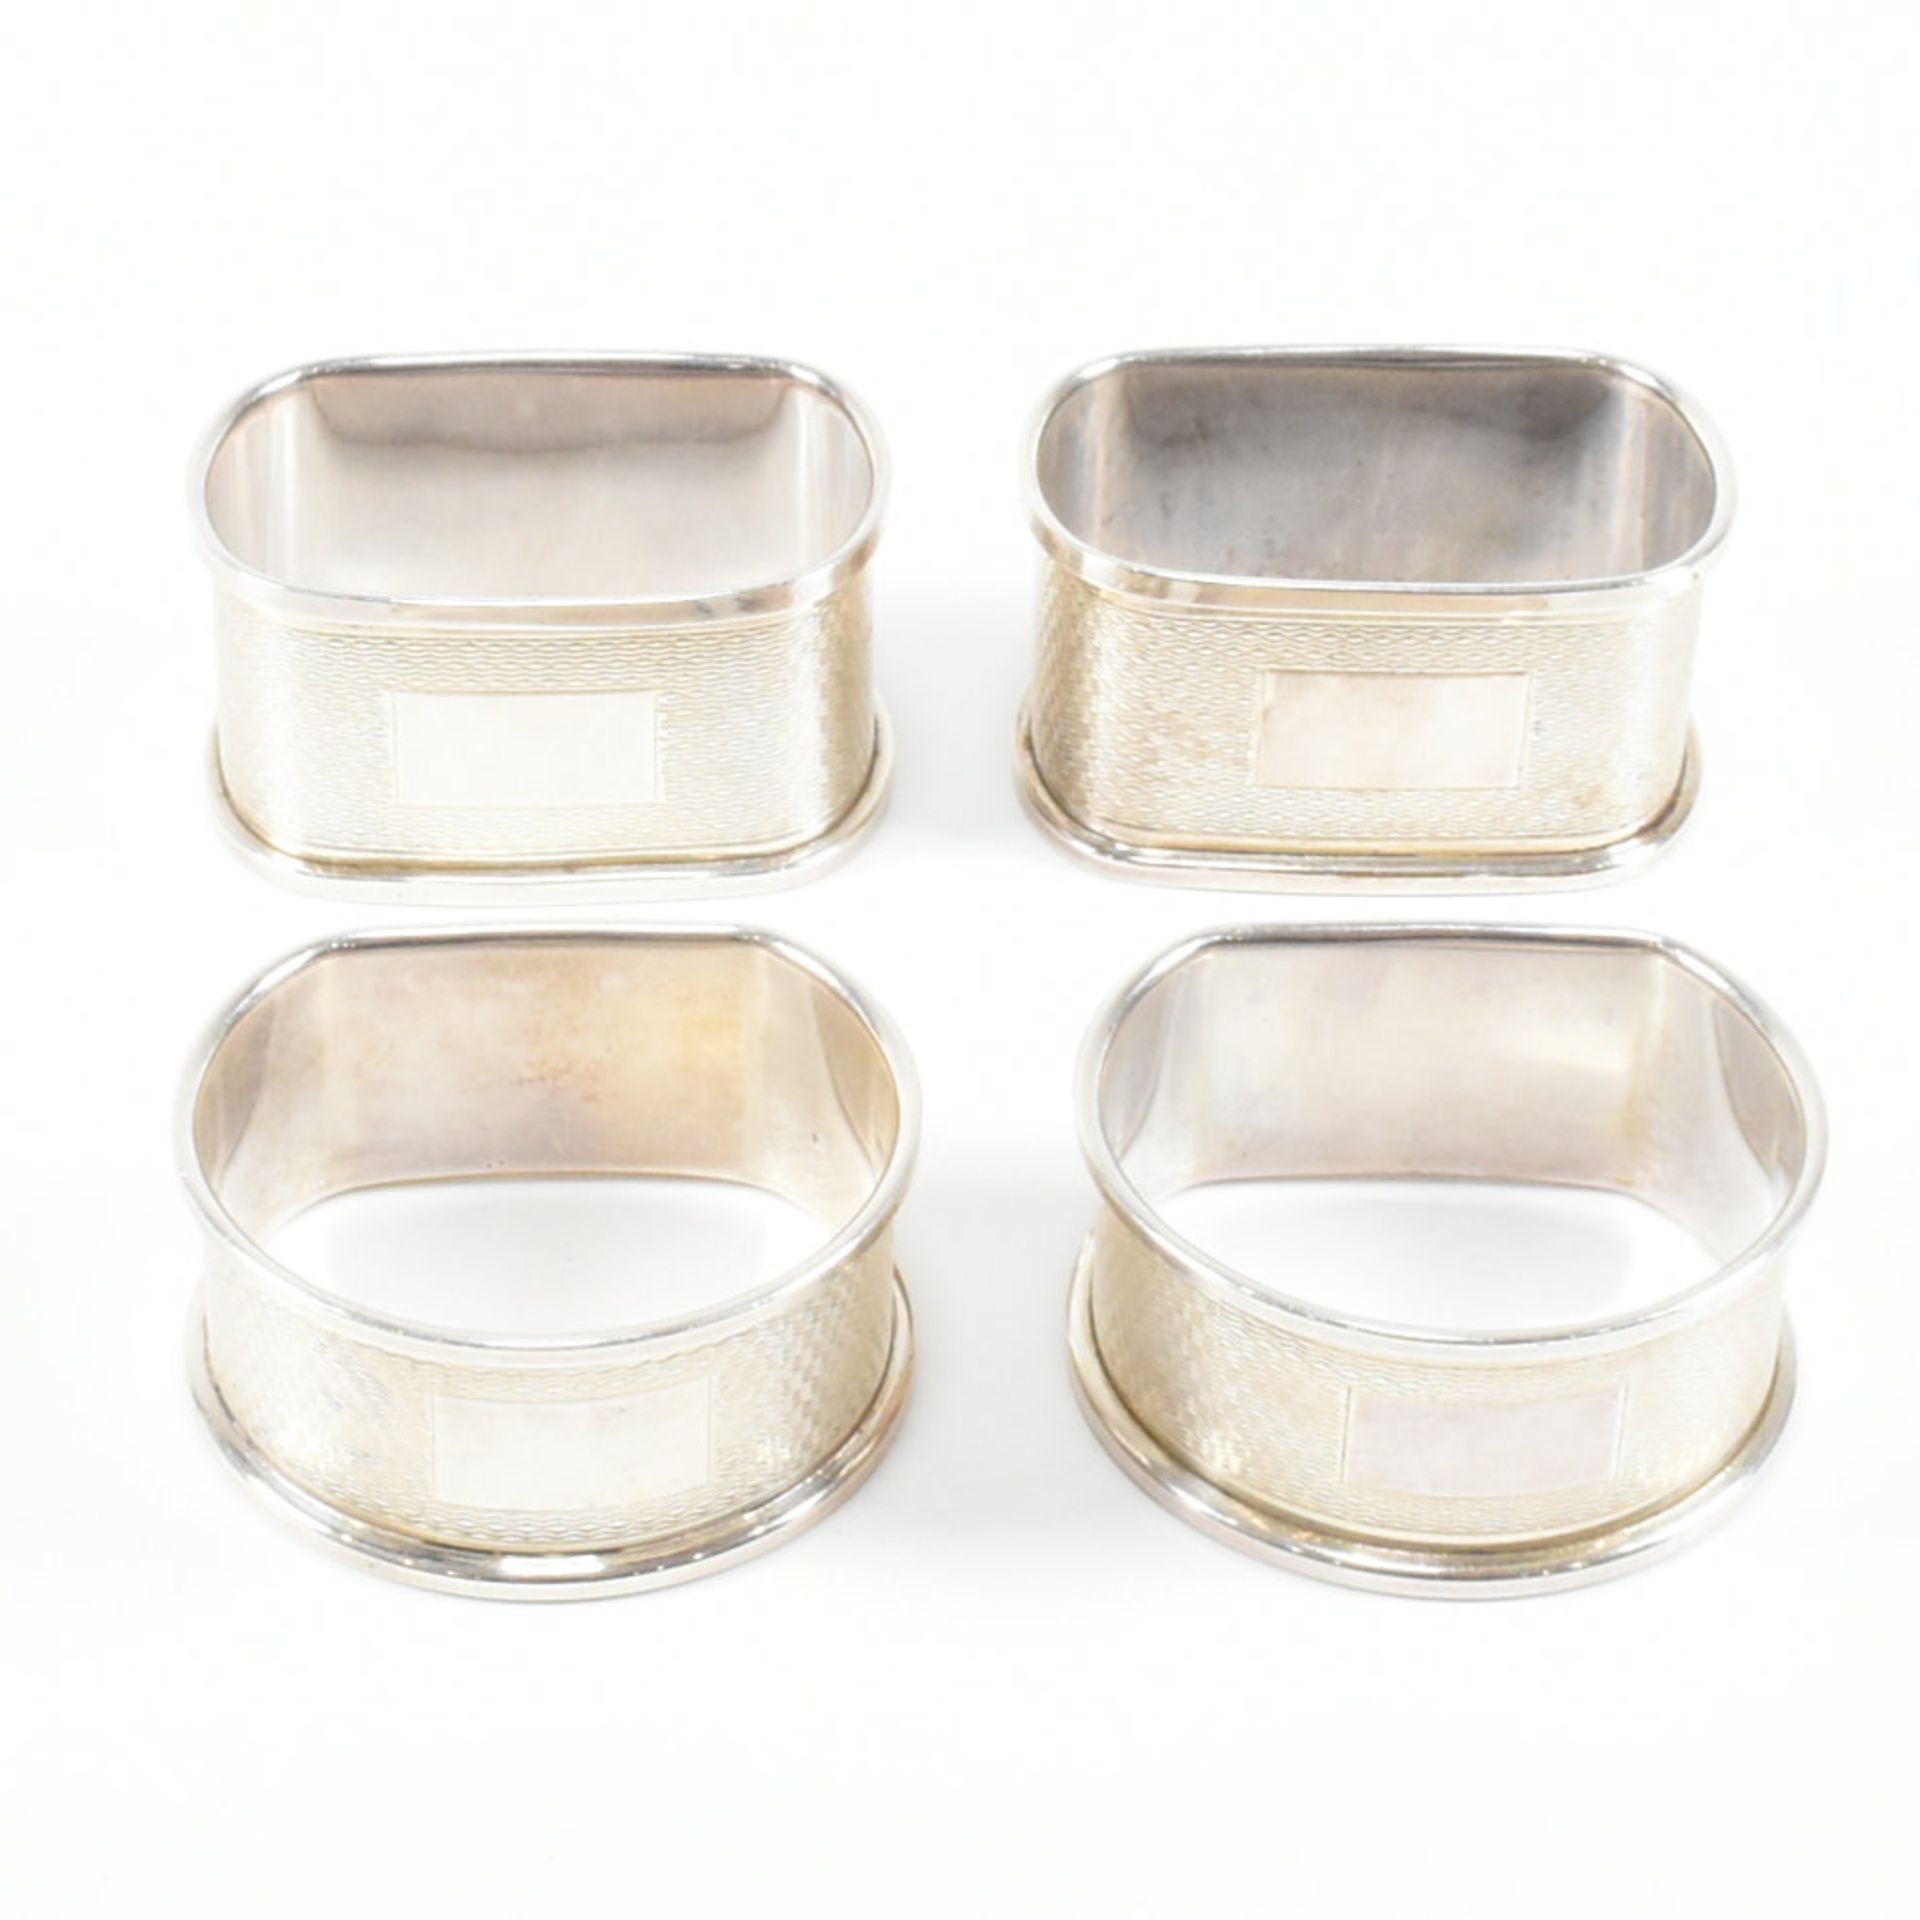 FIVE HALLMARKED SILVER NAPKIN RINGS - Image 10 of 13